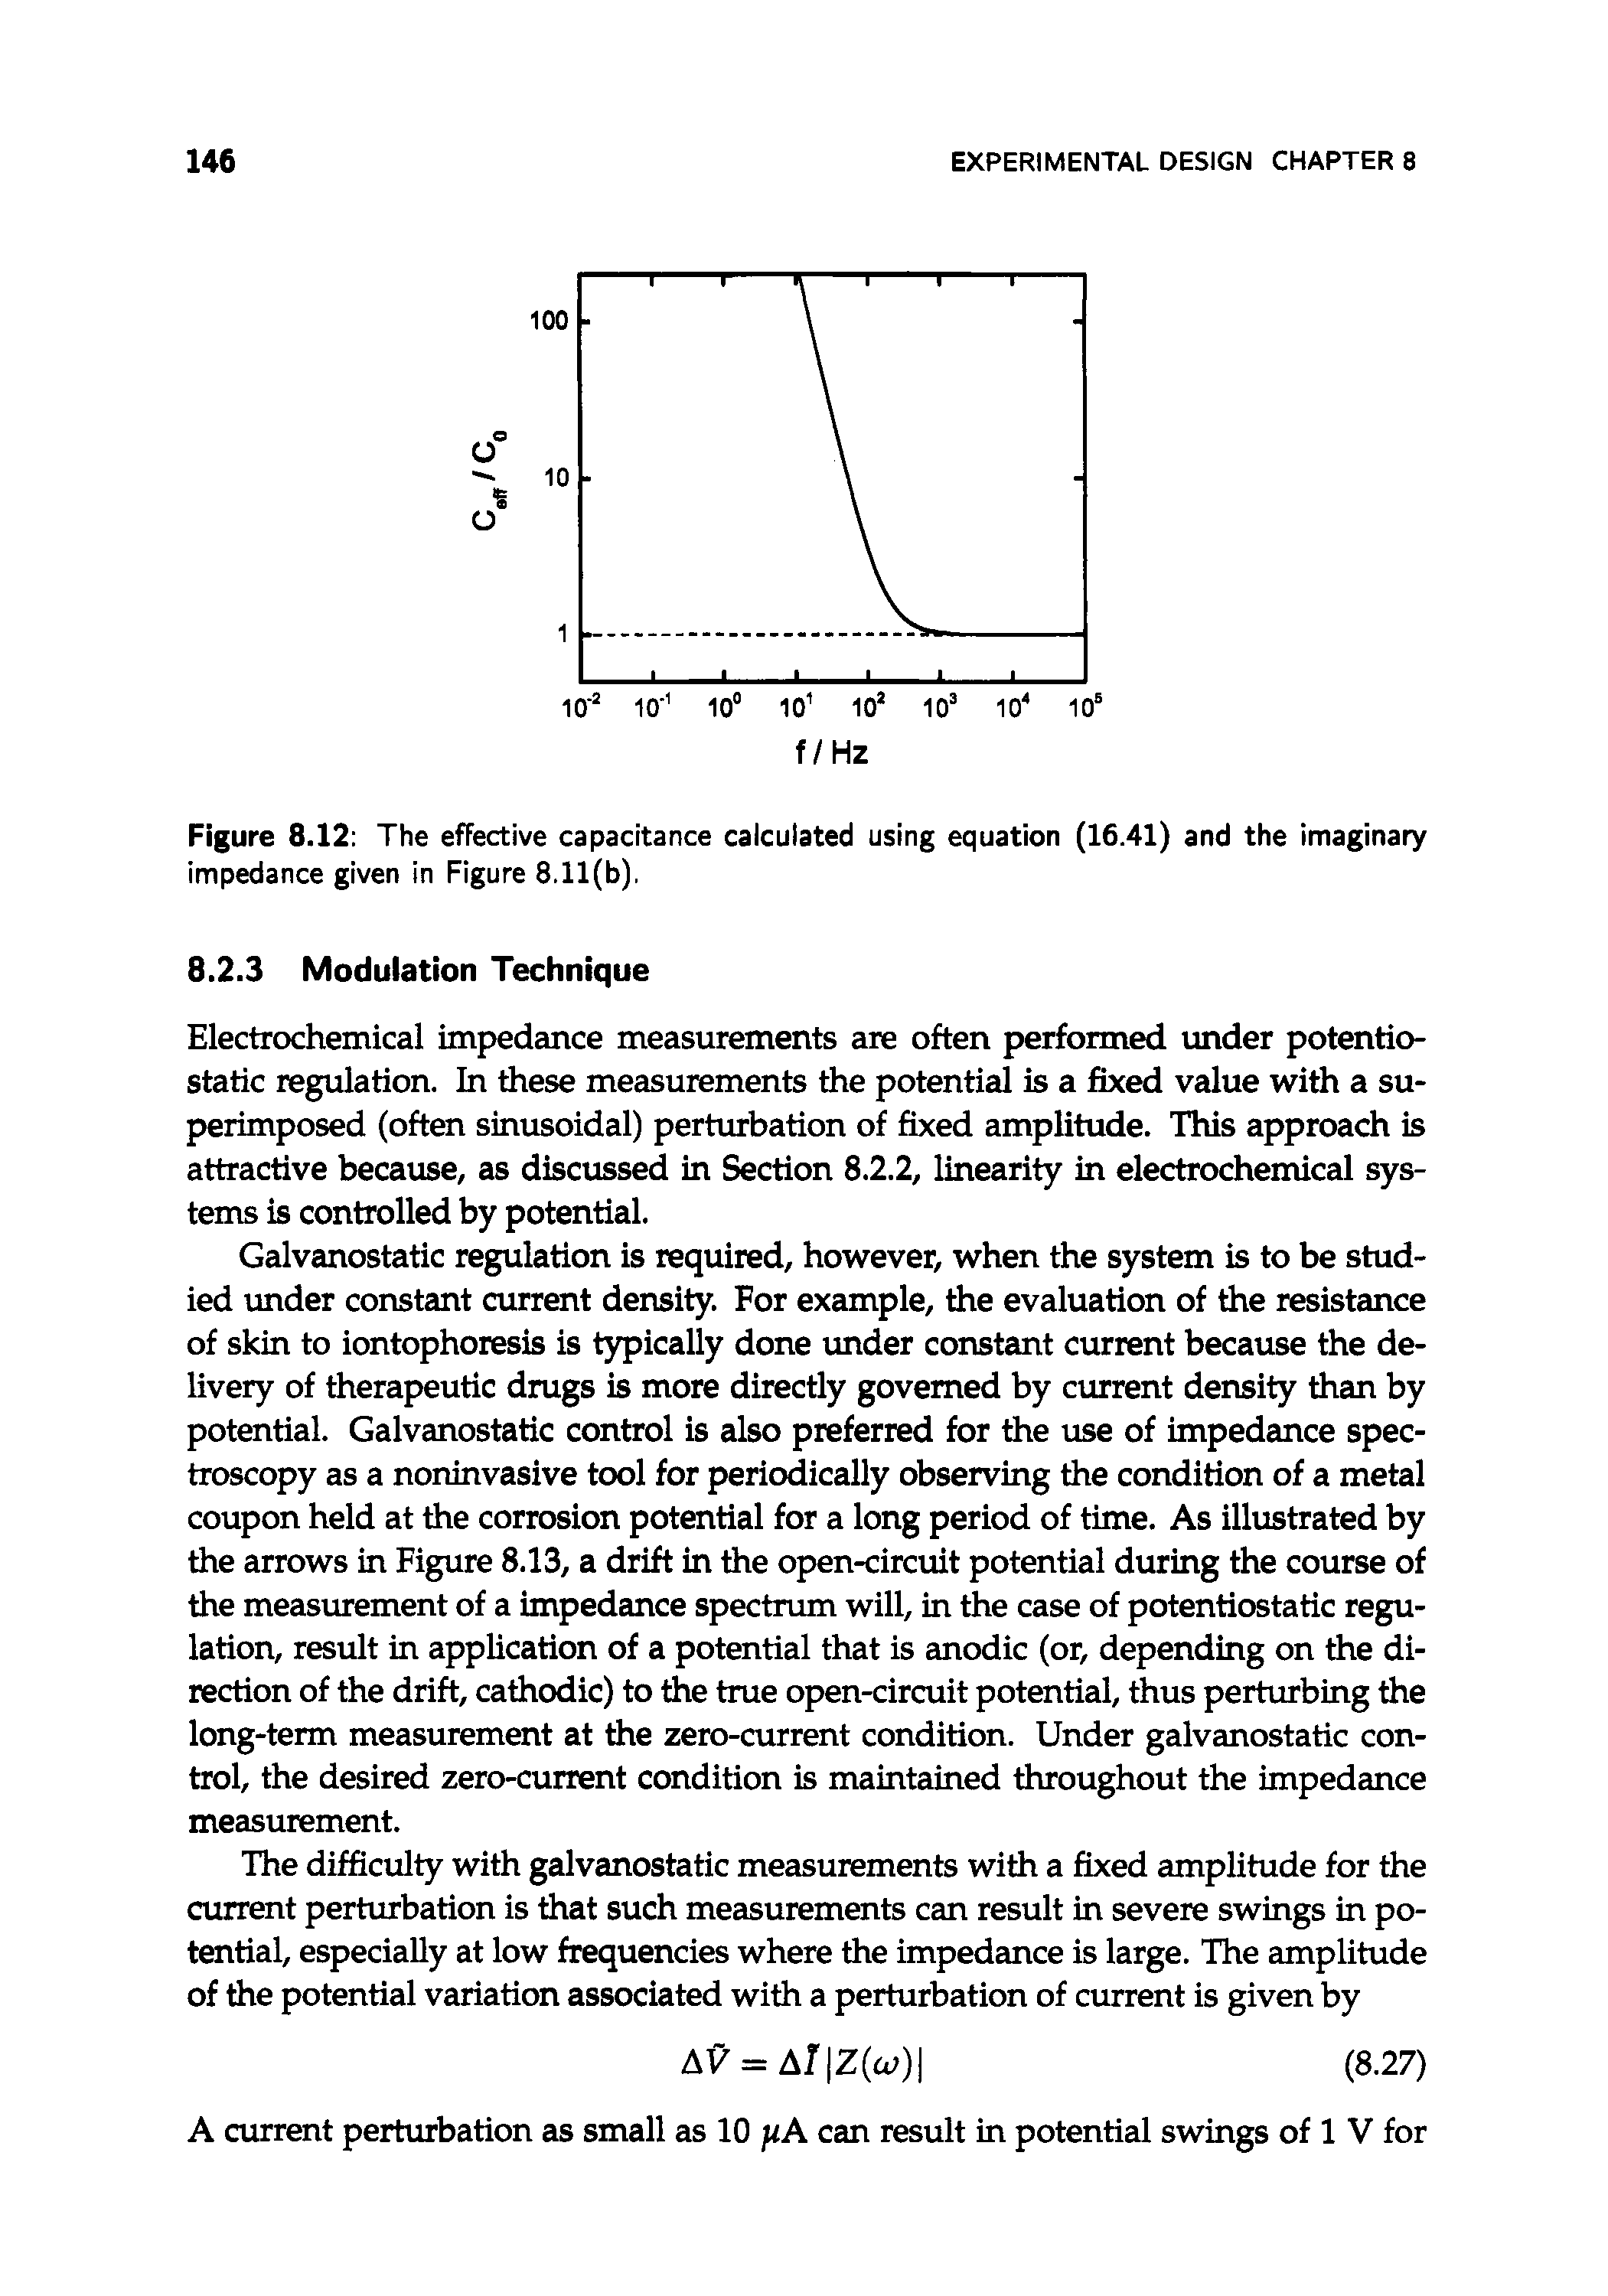 Figure 8.12 The effective capacitance calculated using equation (16.41) and the imaginary impedance given in Figure 8.11(b),...